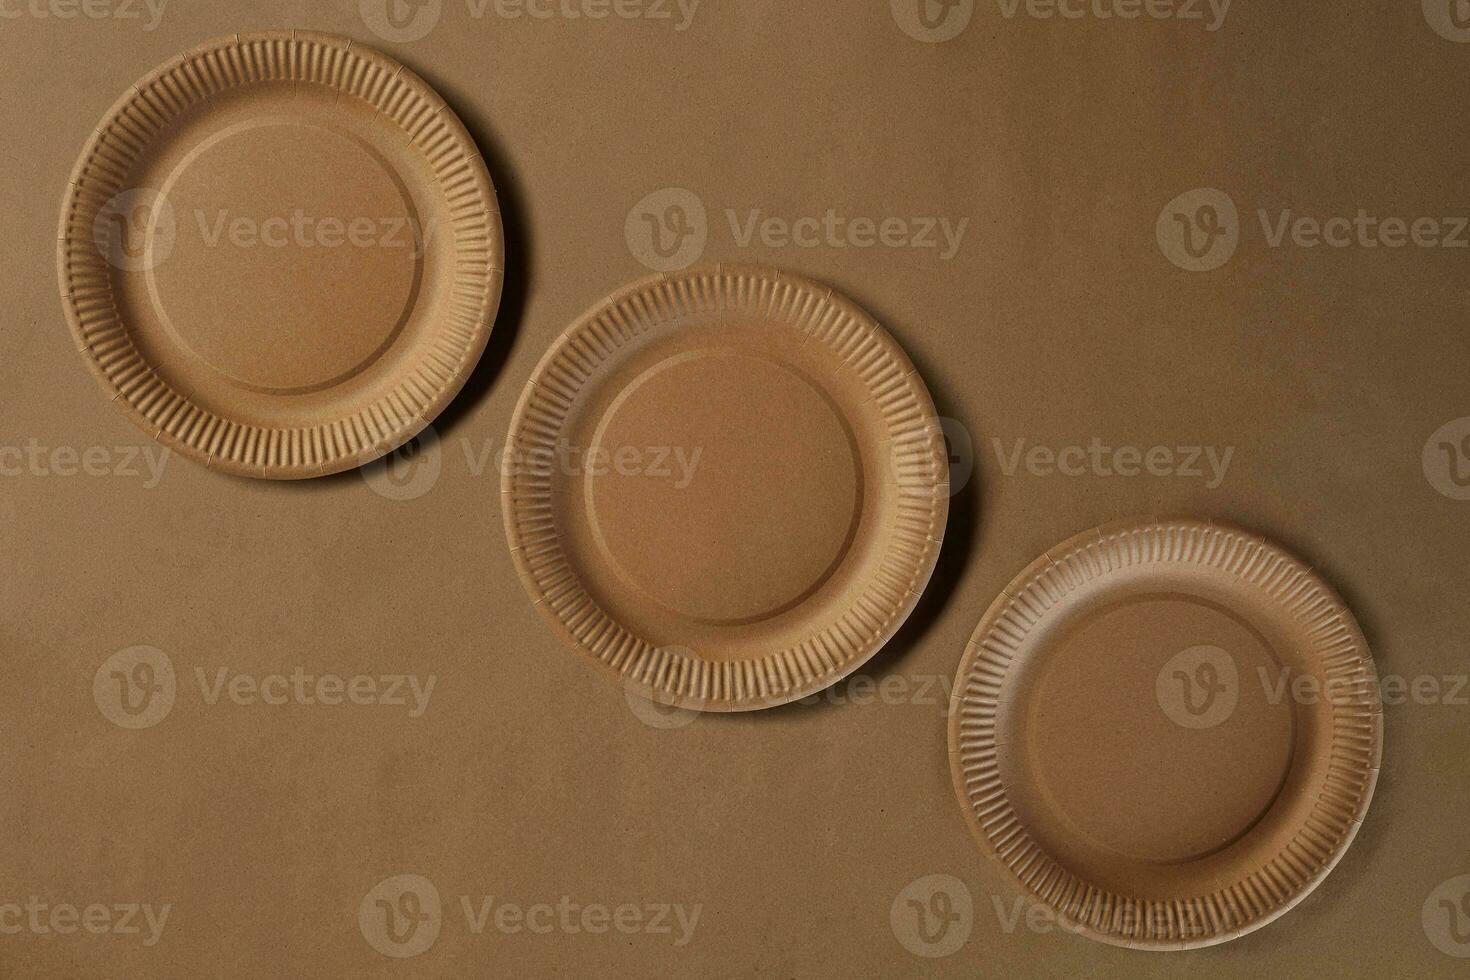 Eco friendly disposable tableware. Biodegradable craft dishes. Recycling concept. Also used in fast food, restaurants, takeaways, picnics. Close-up. photo